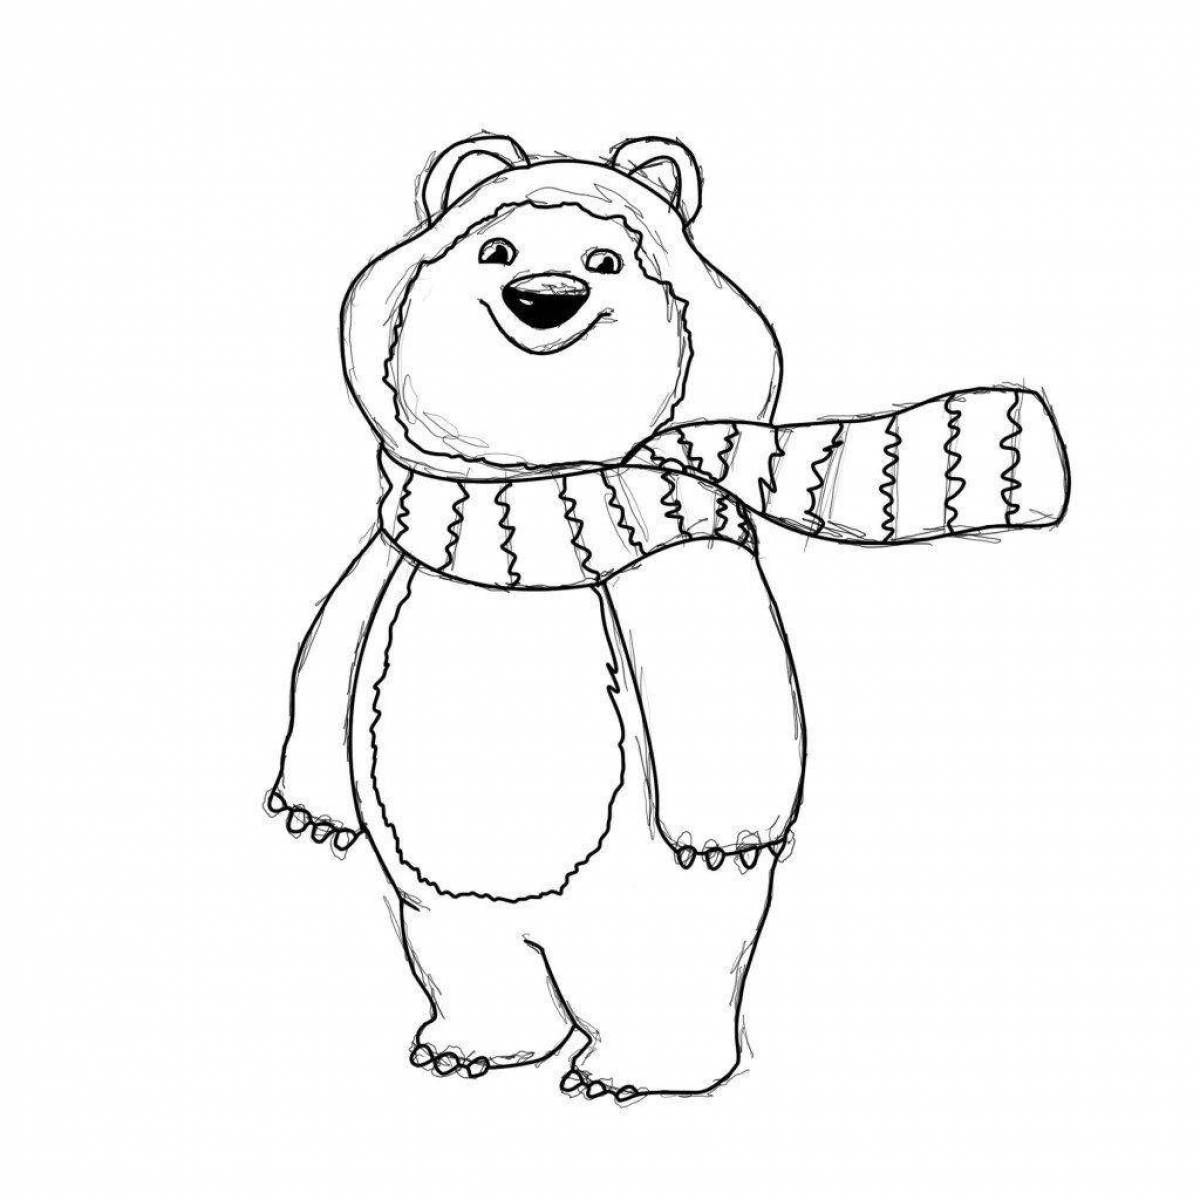 Colorful olympic bear coloring book for kids